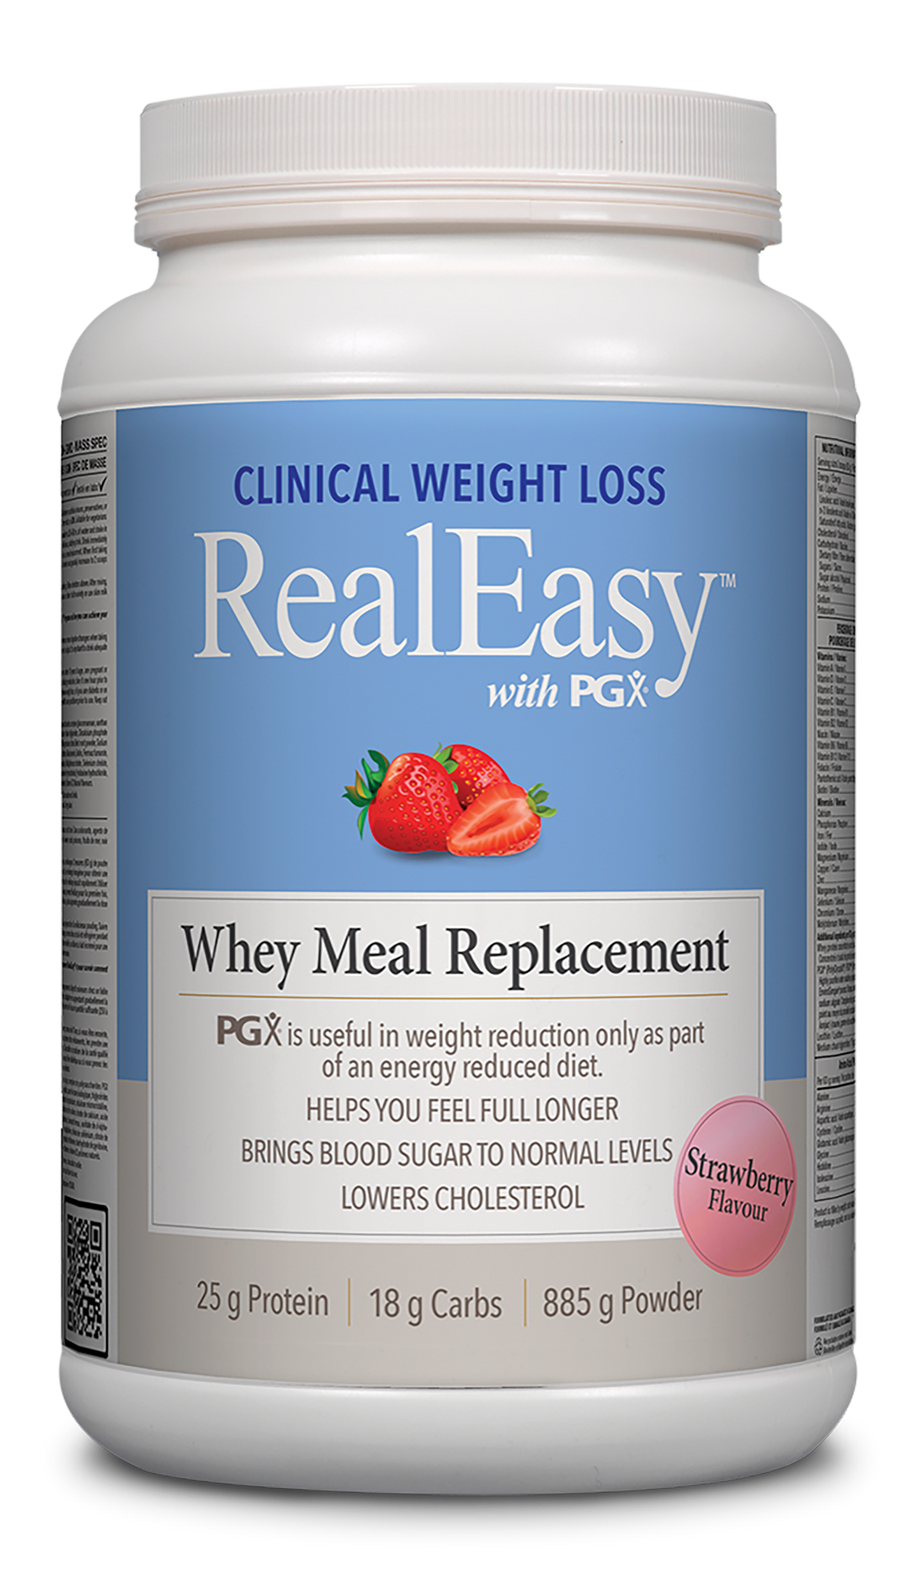 Natural Factors RealEasy with PGX Whey Meal Replacement Strawberry Flavour 885g Powder